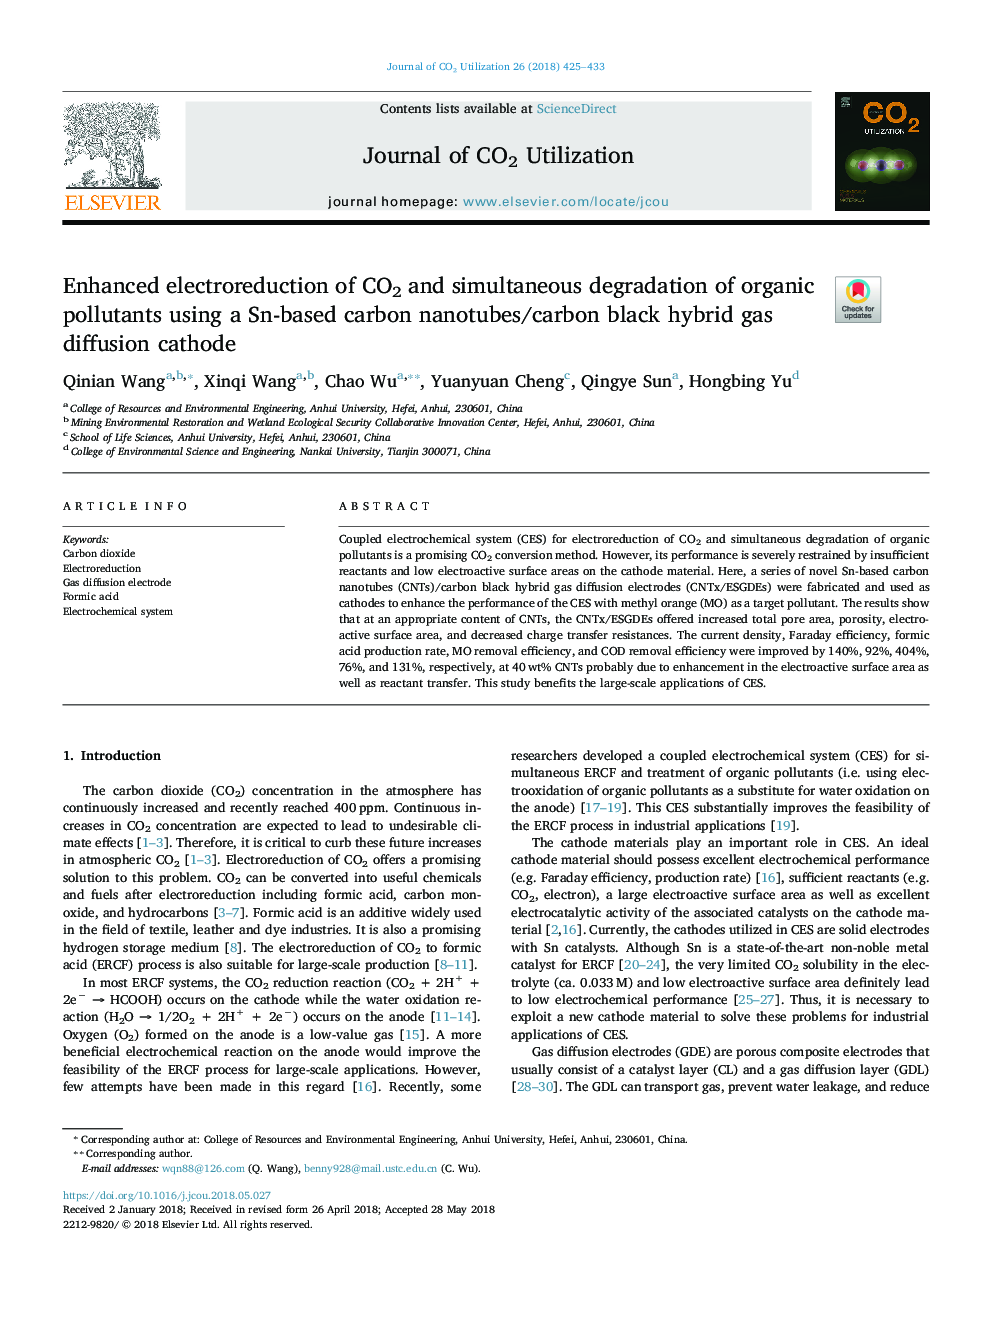 Enhanced electroreduction of CO2 and simultaneous degradation of organic pollutants using a Sn-based carbon nanotubes/carbon black hybrid gas diffusion cathode